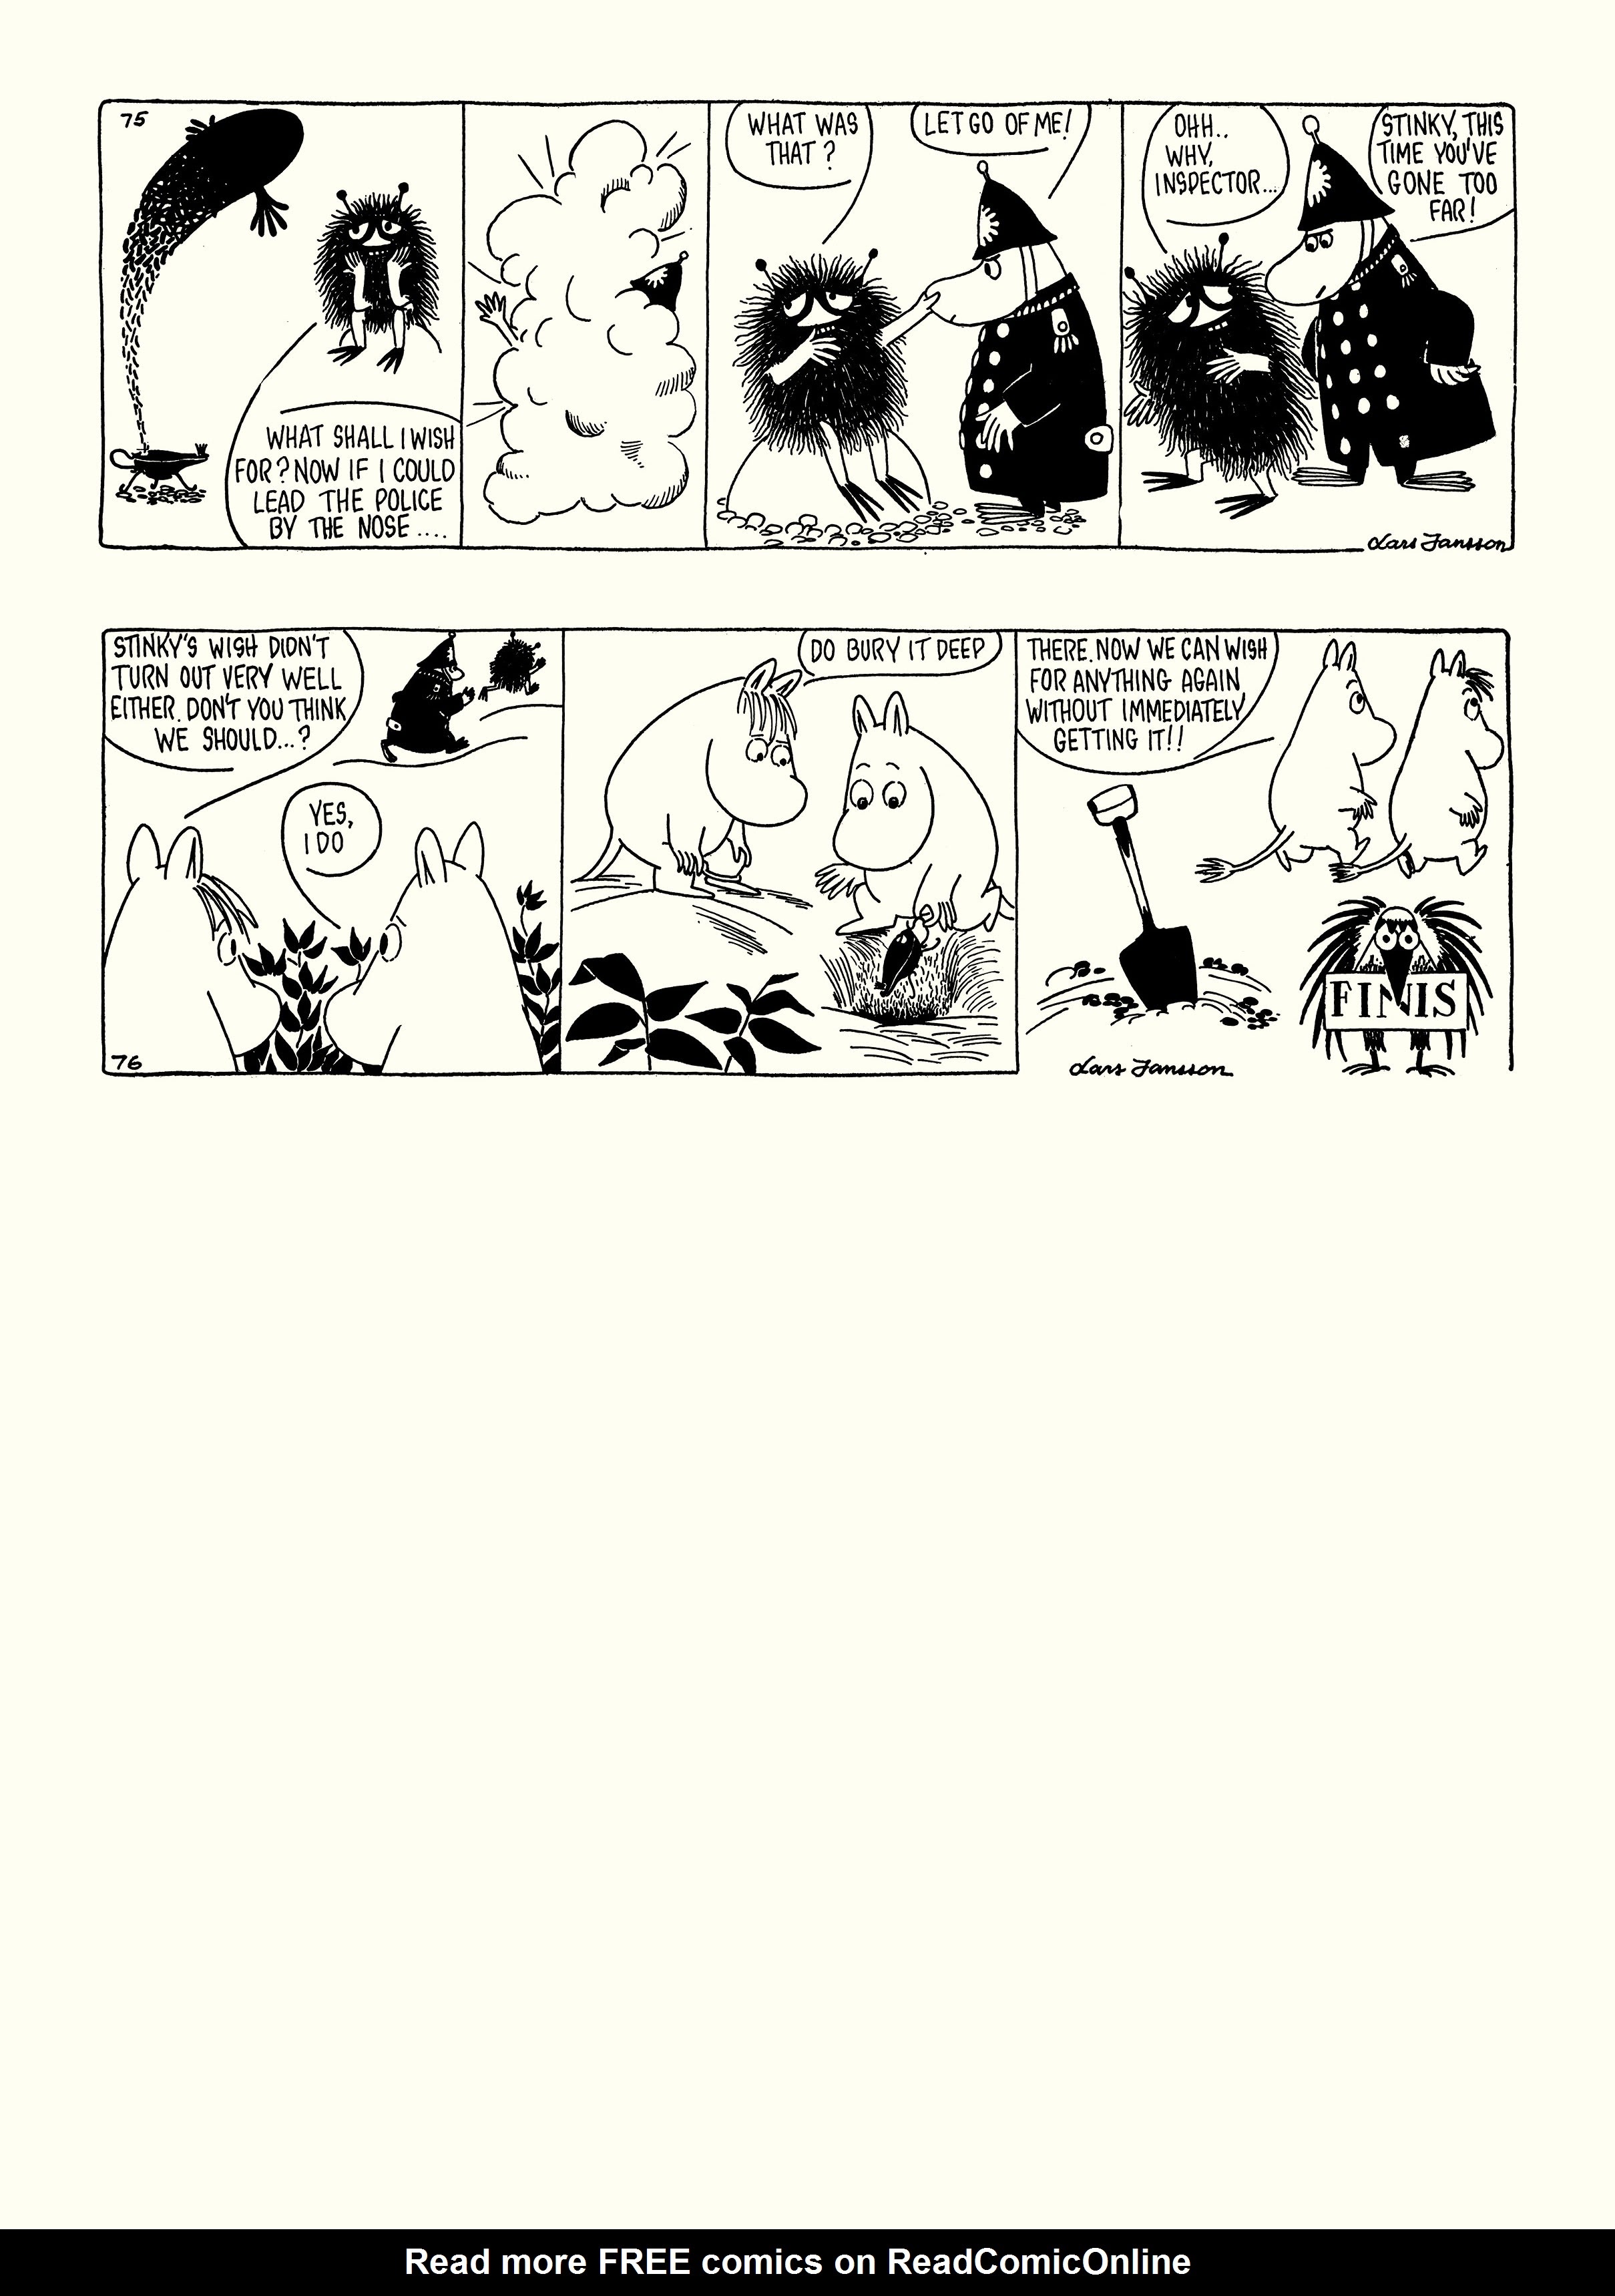 Read online Moomin: The Complete Lars Jansson Comic Strip comic -  Issue # TPB 6 - 25